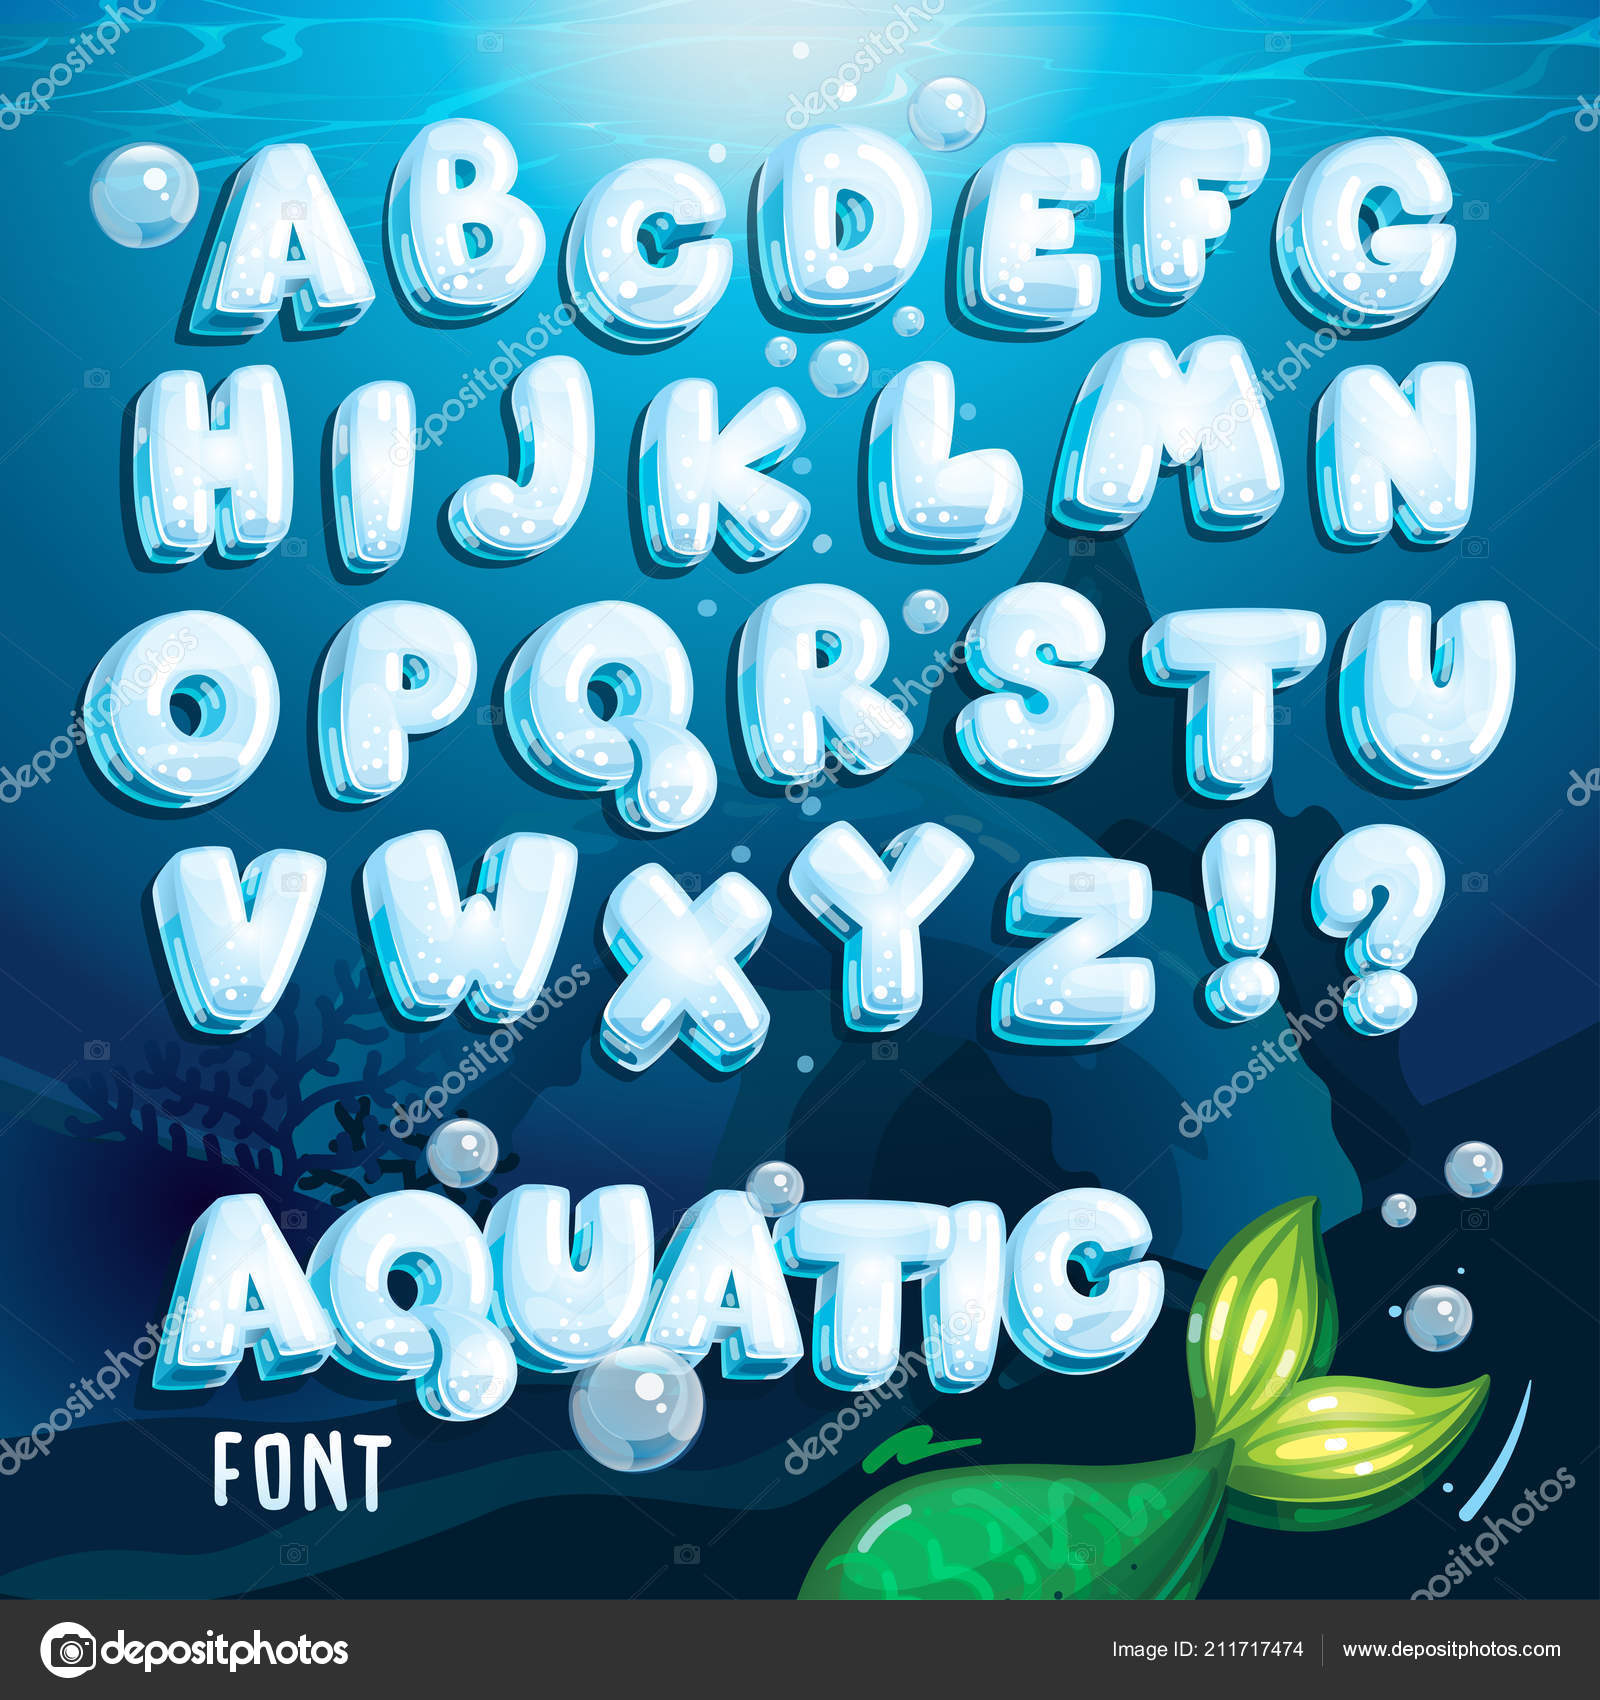 Water alphabet concept design letters from a to z Vector Image